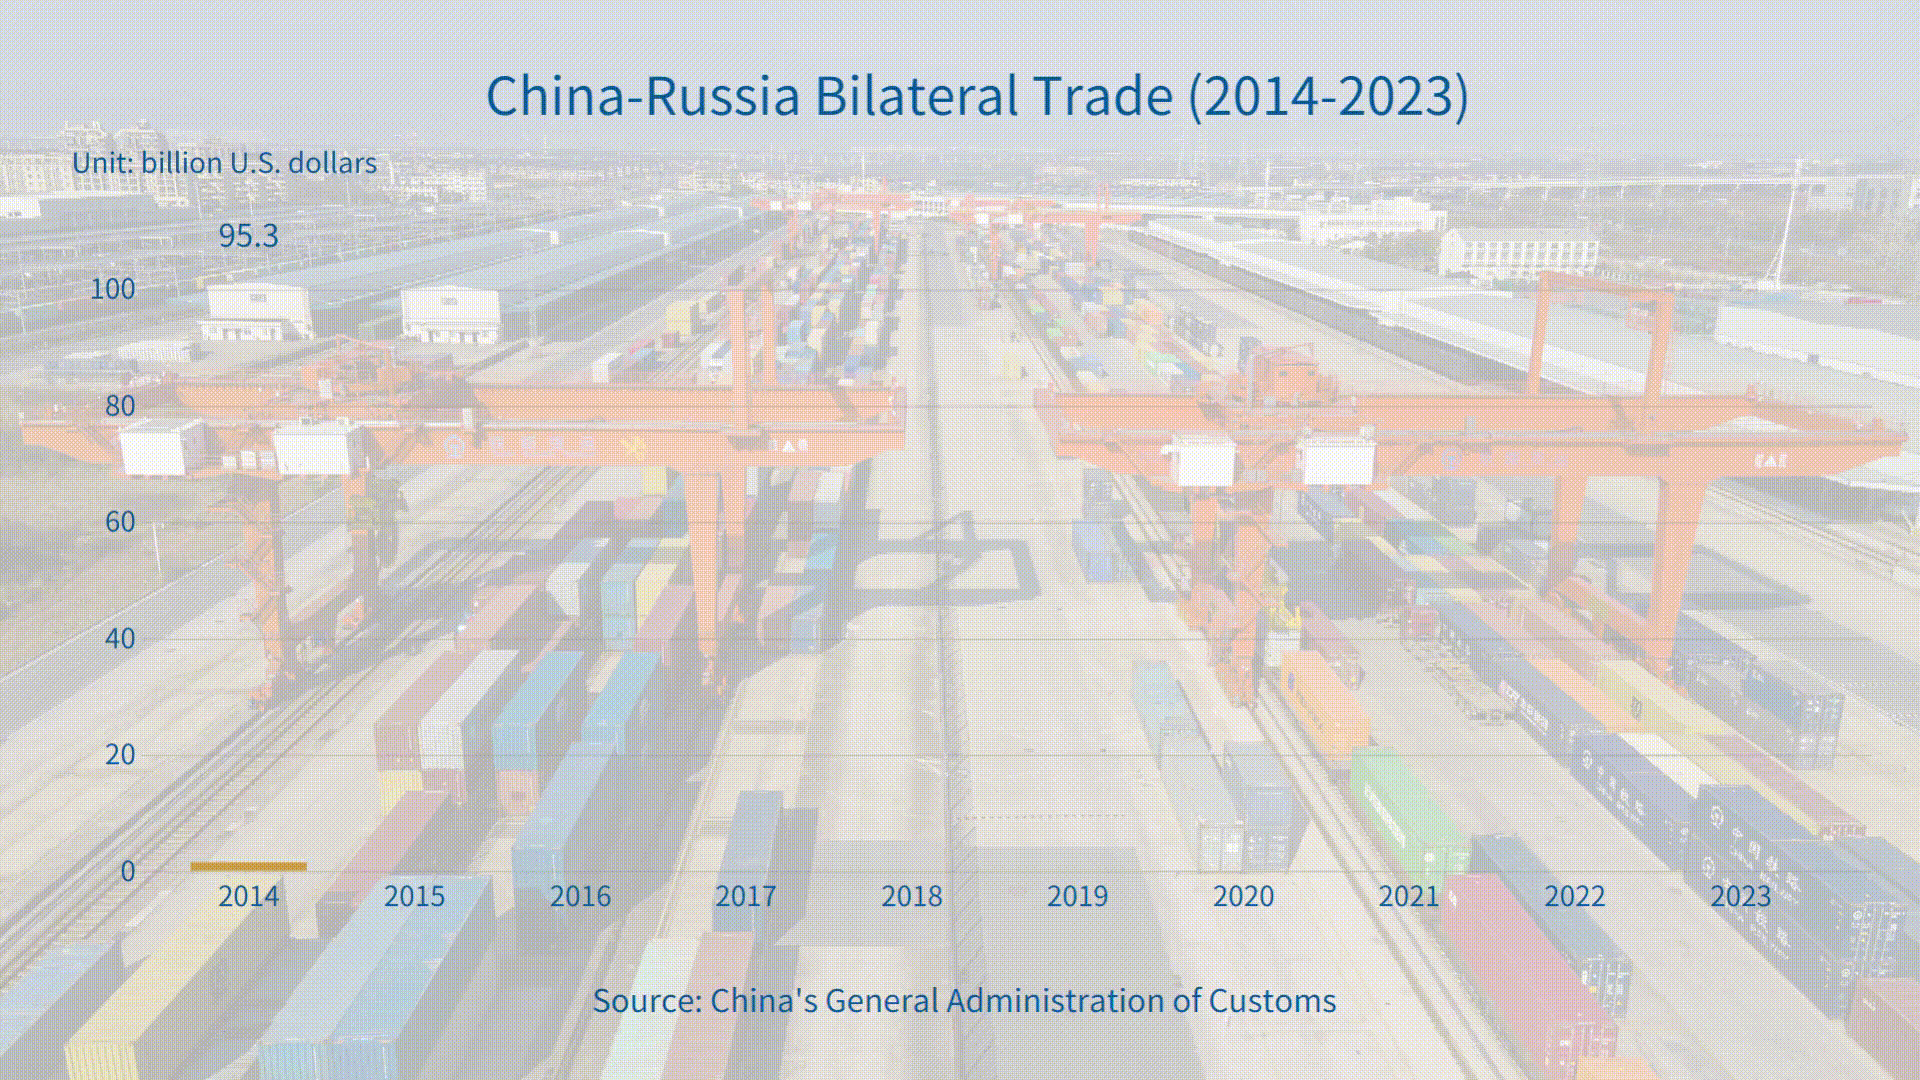 China-Russia bilateral trade shows strong momentum